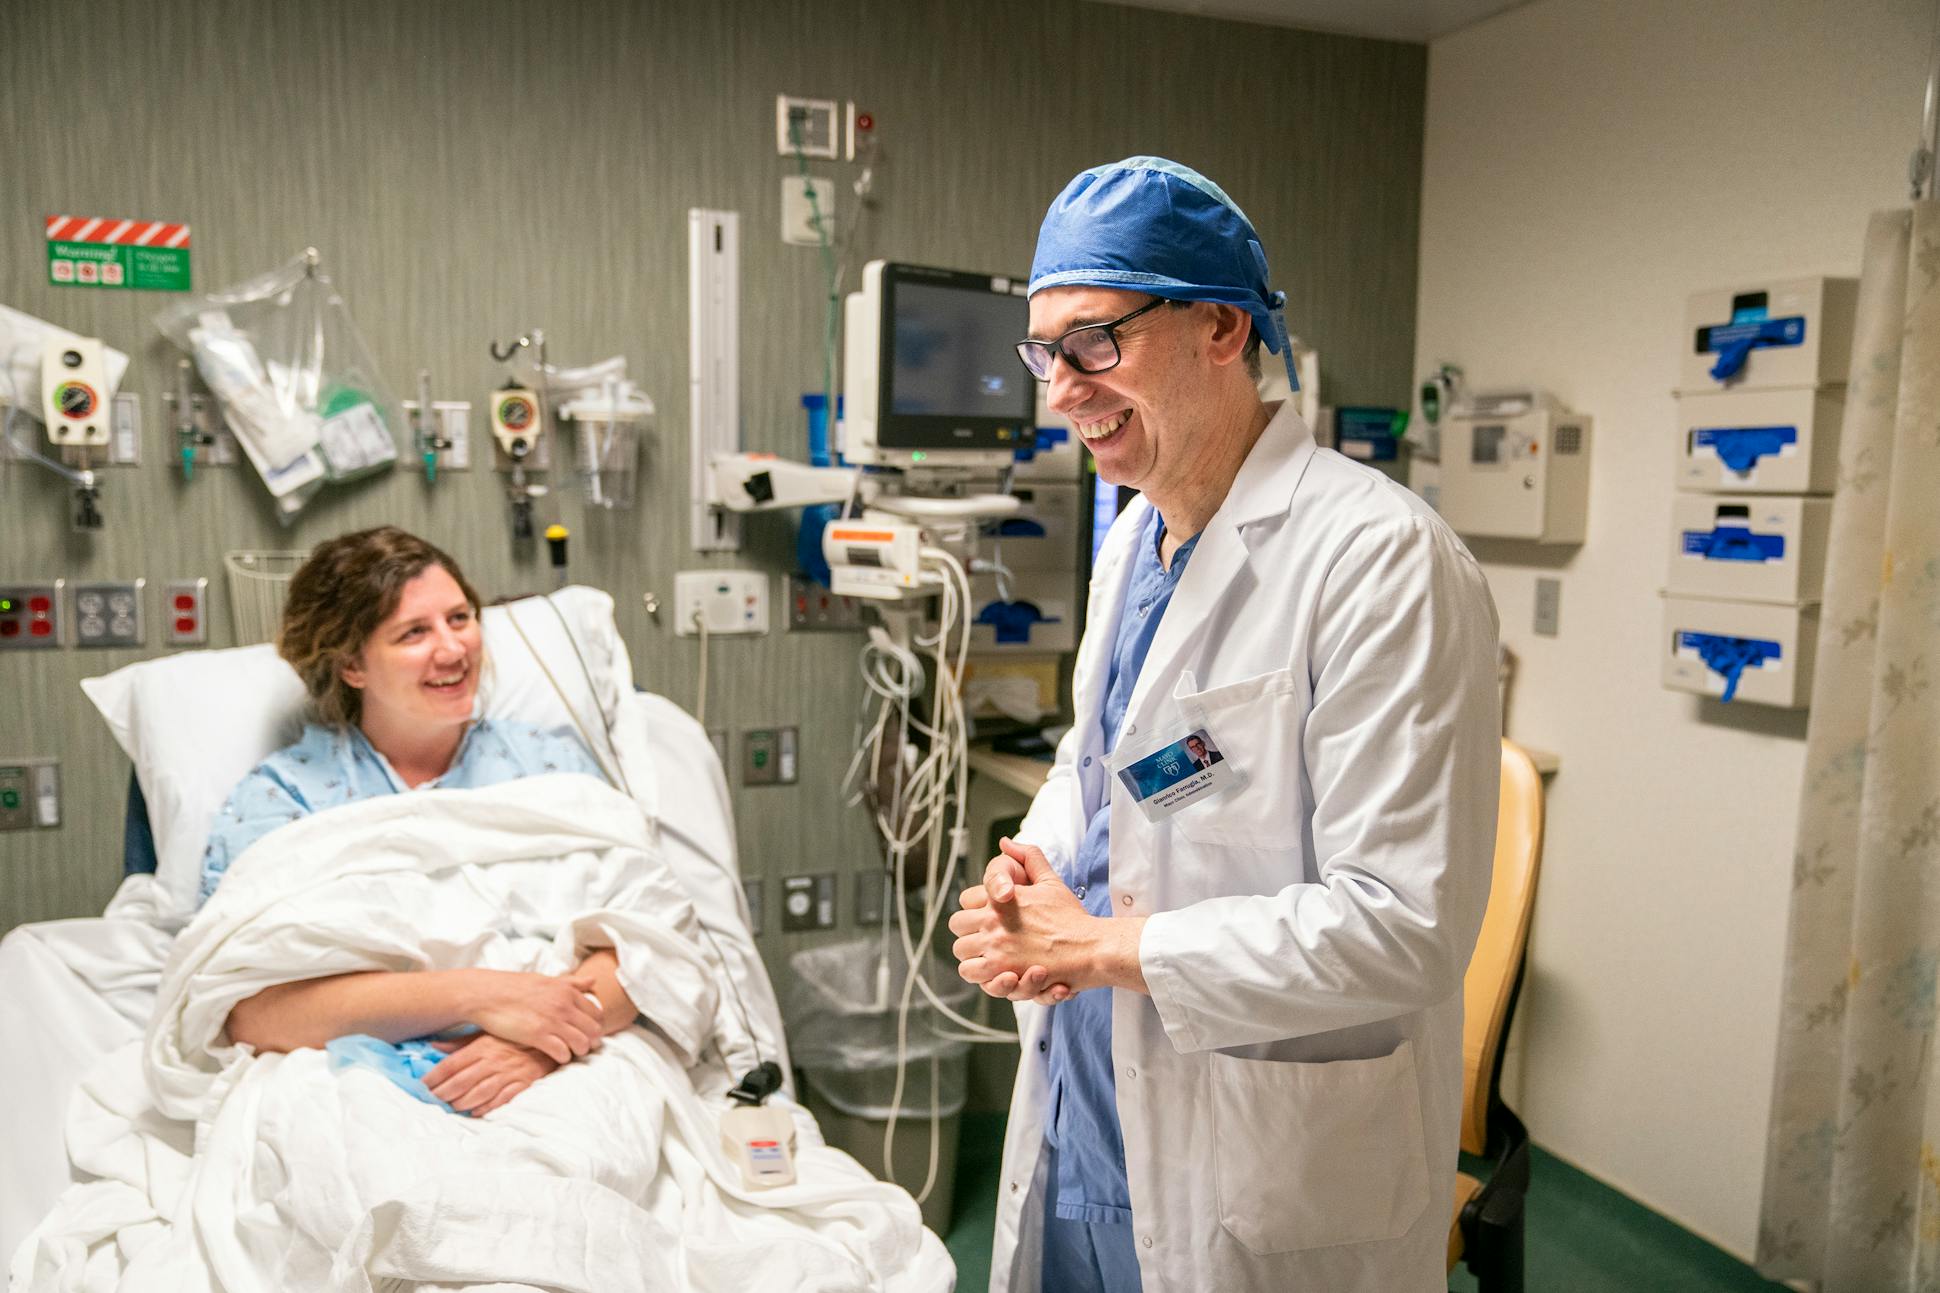 Dr. Gianrico Farrugia chatted with patient Gabrielle Meyer before her sinus surgery.